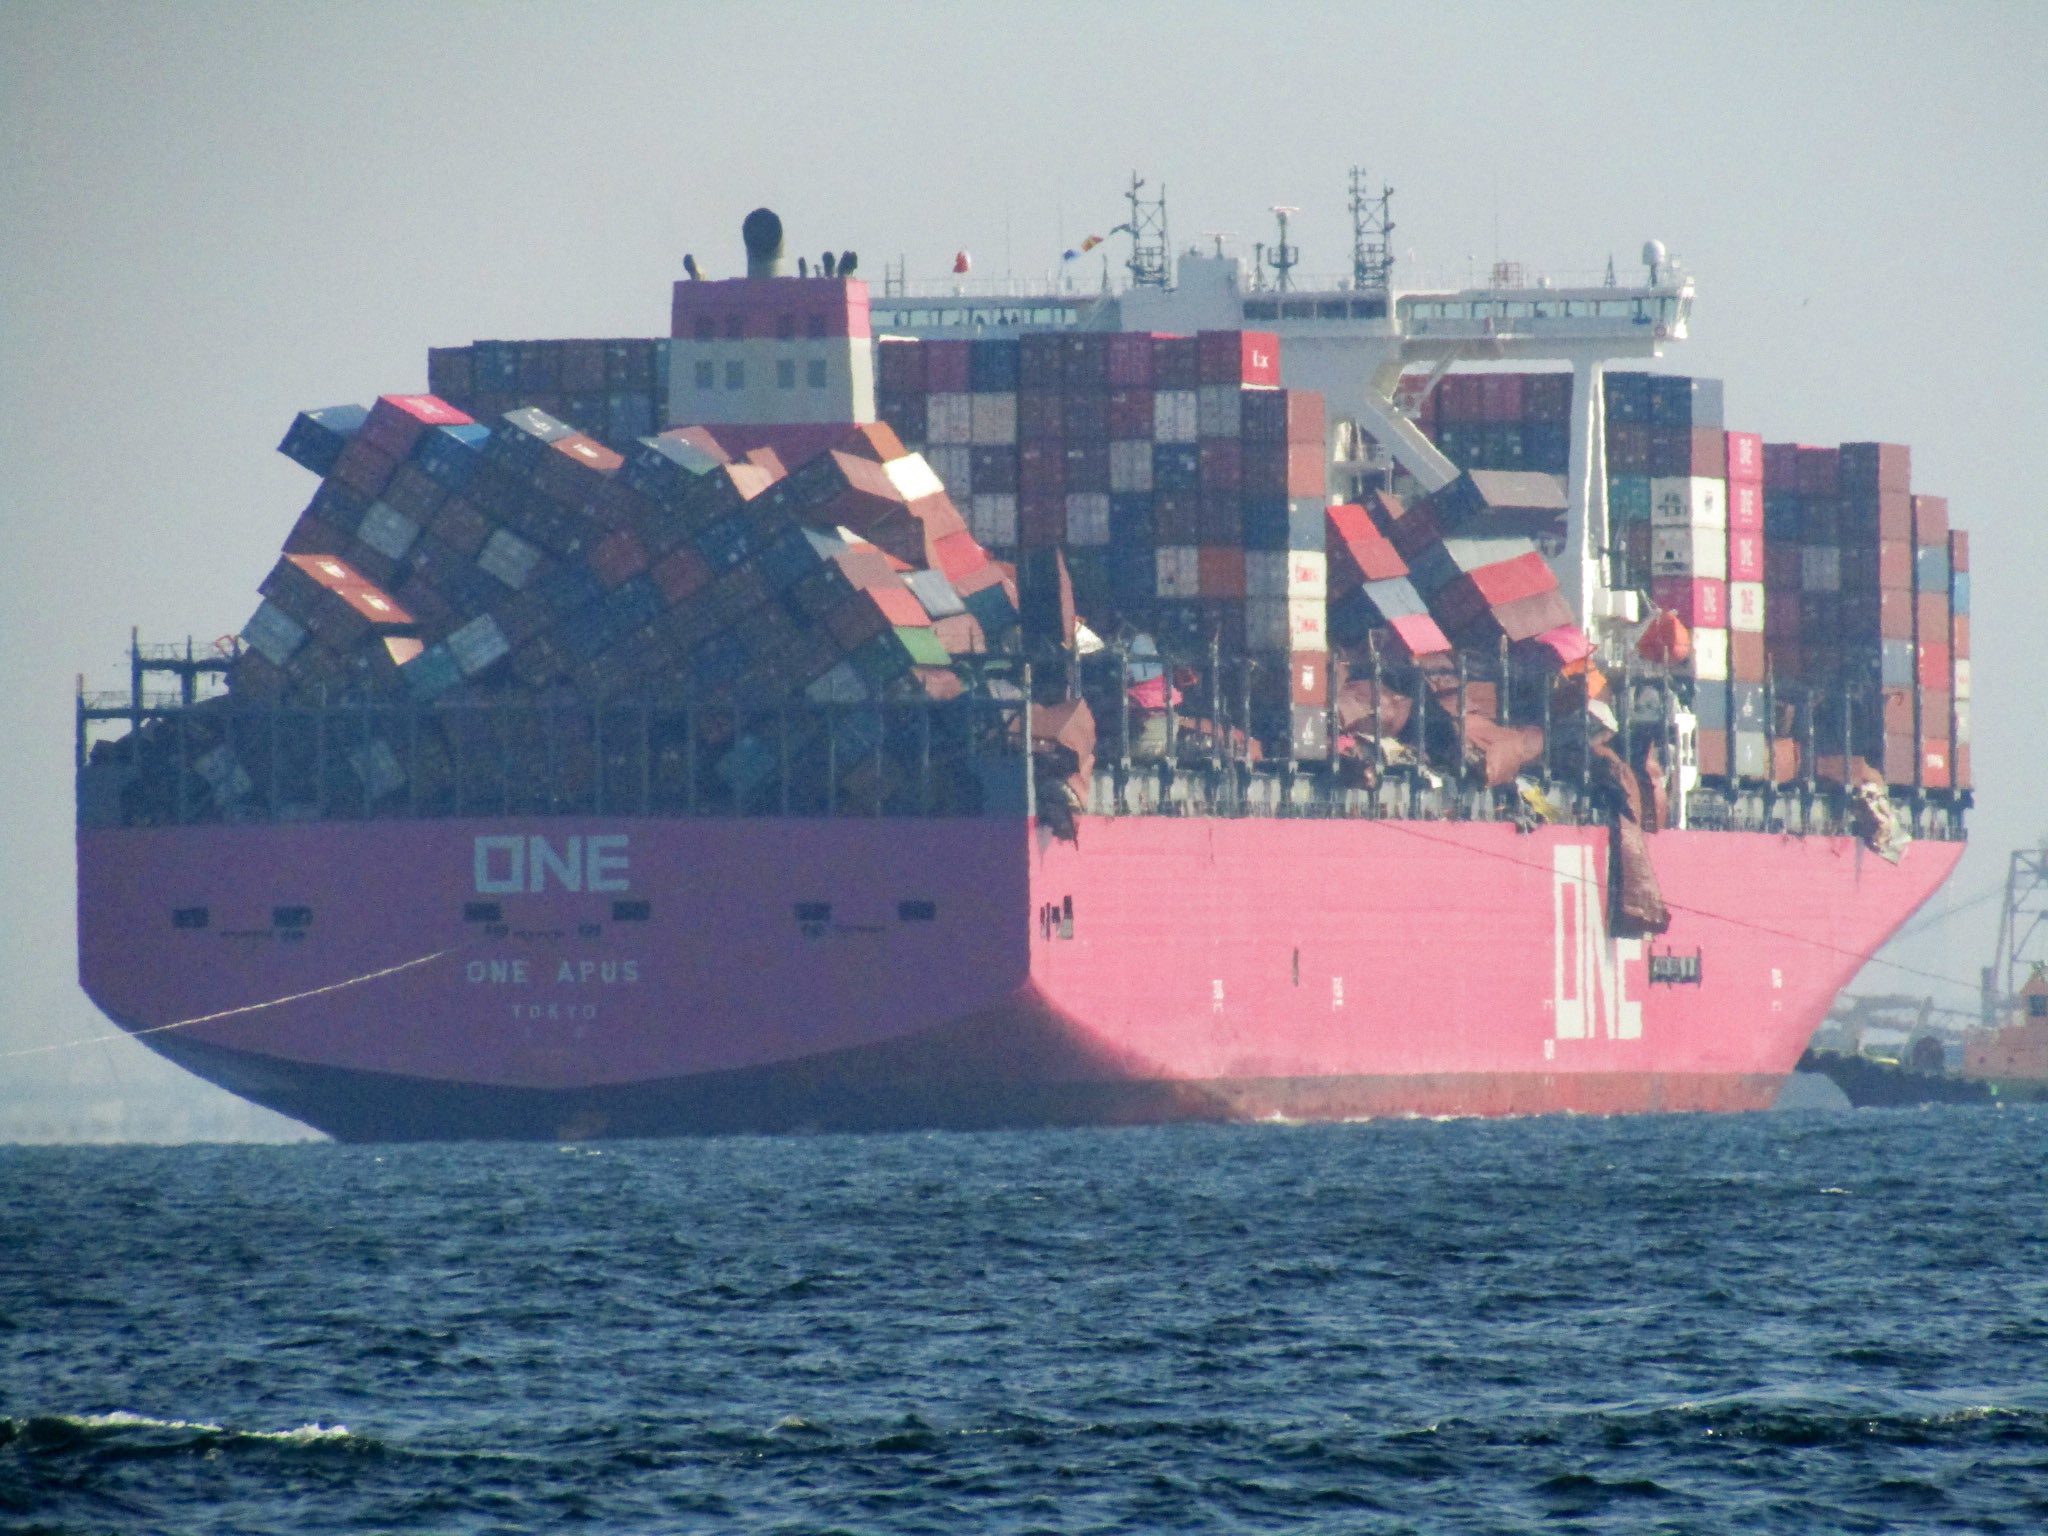 Annual Report by World Shipping Council Reveals Average Loss of 1,629 Shipping Containers at Sea